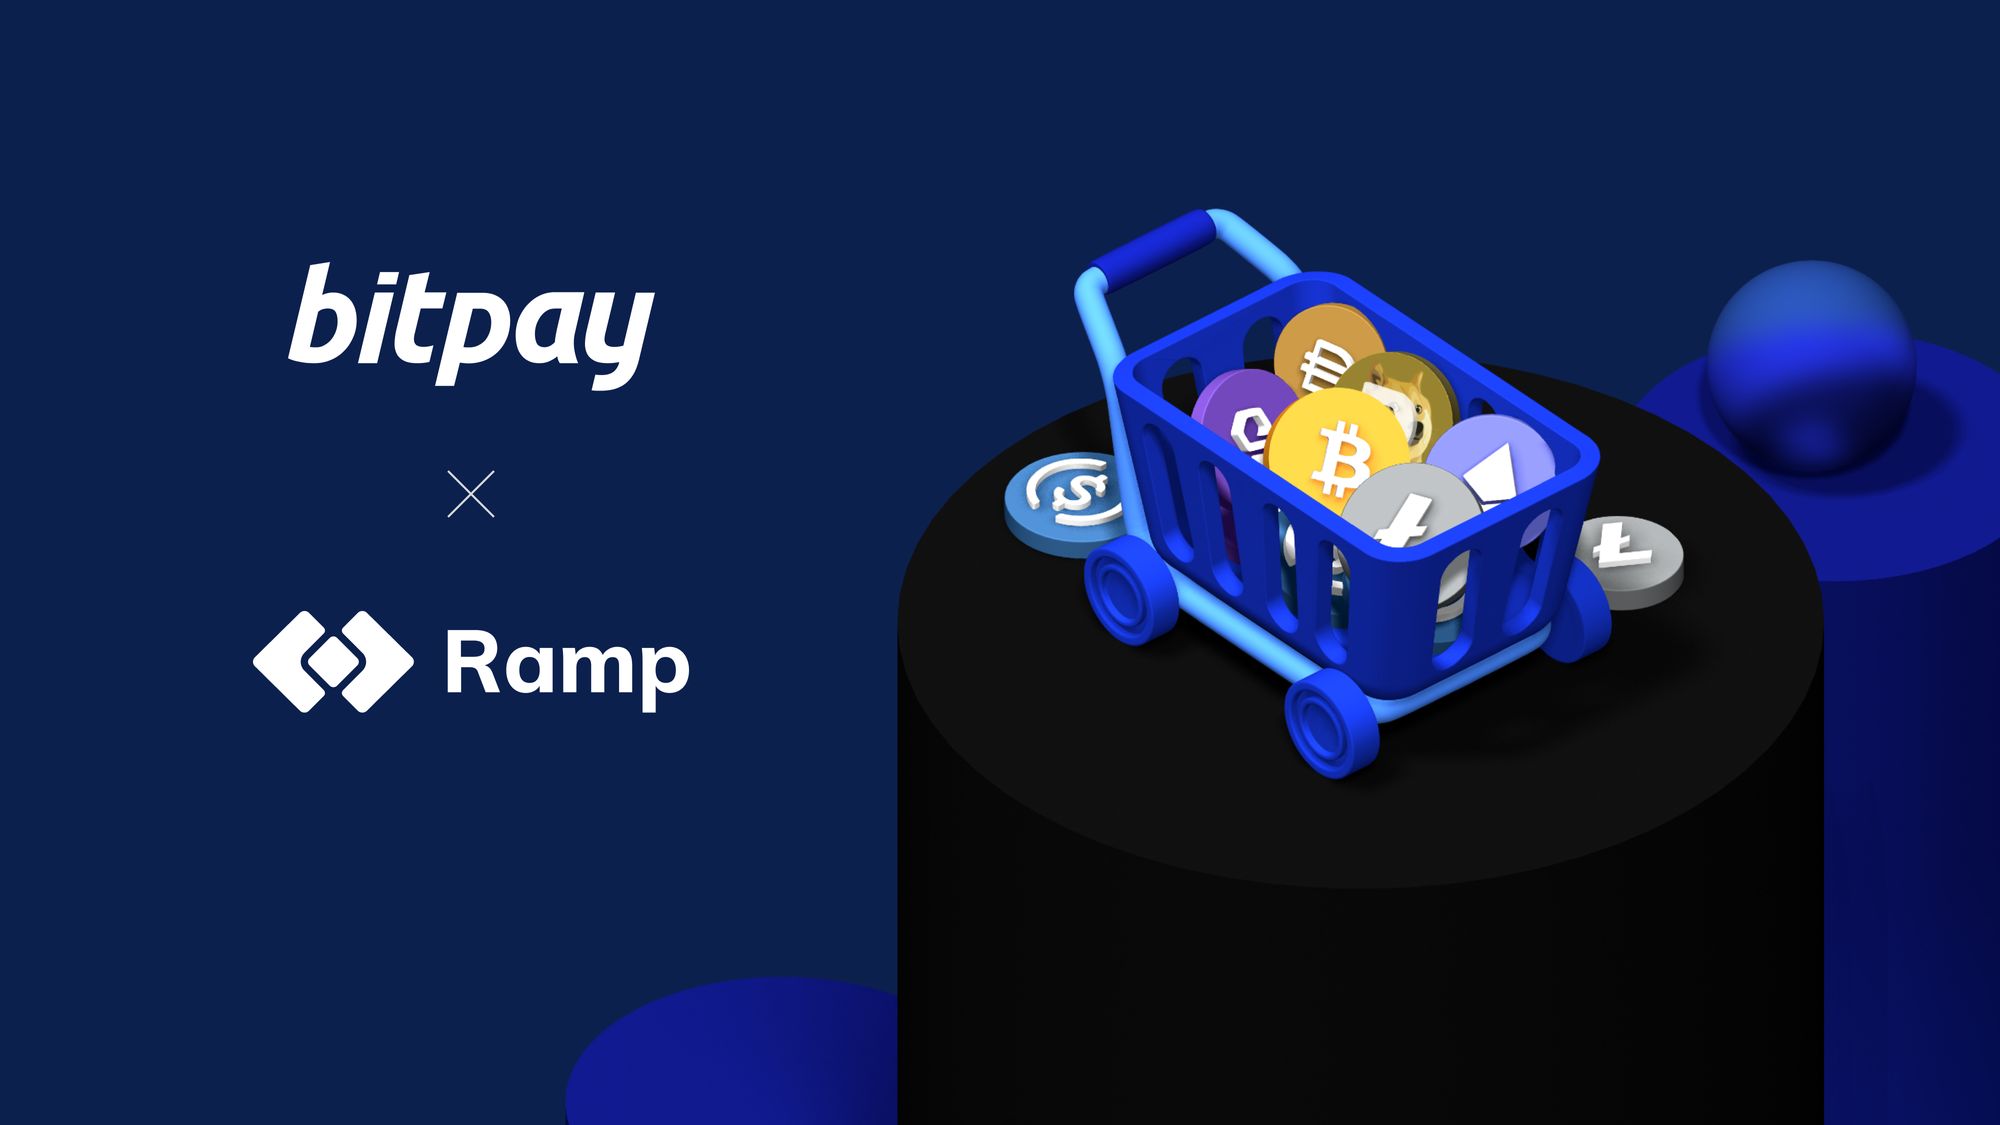 BitPay Partners with Ramp to Provide More Easy Ways to Buy Crypto